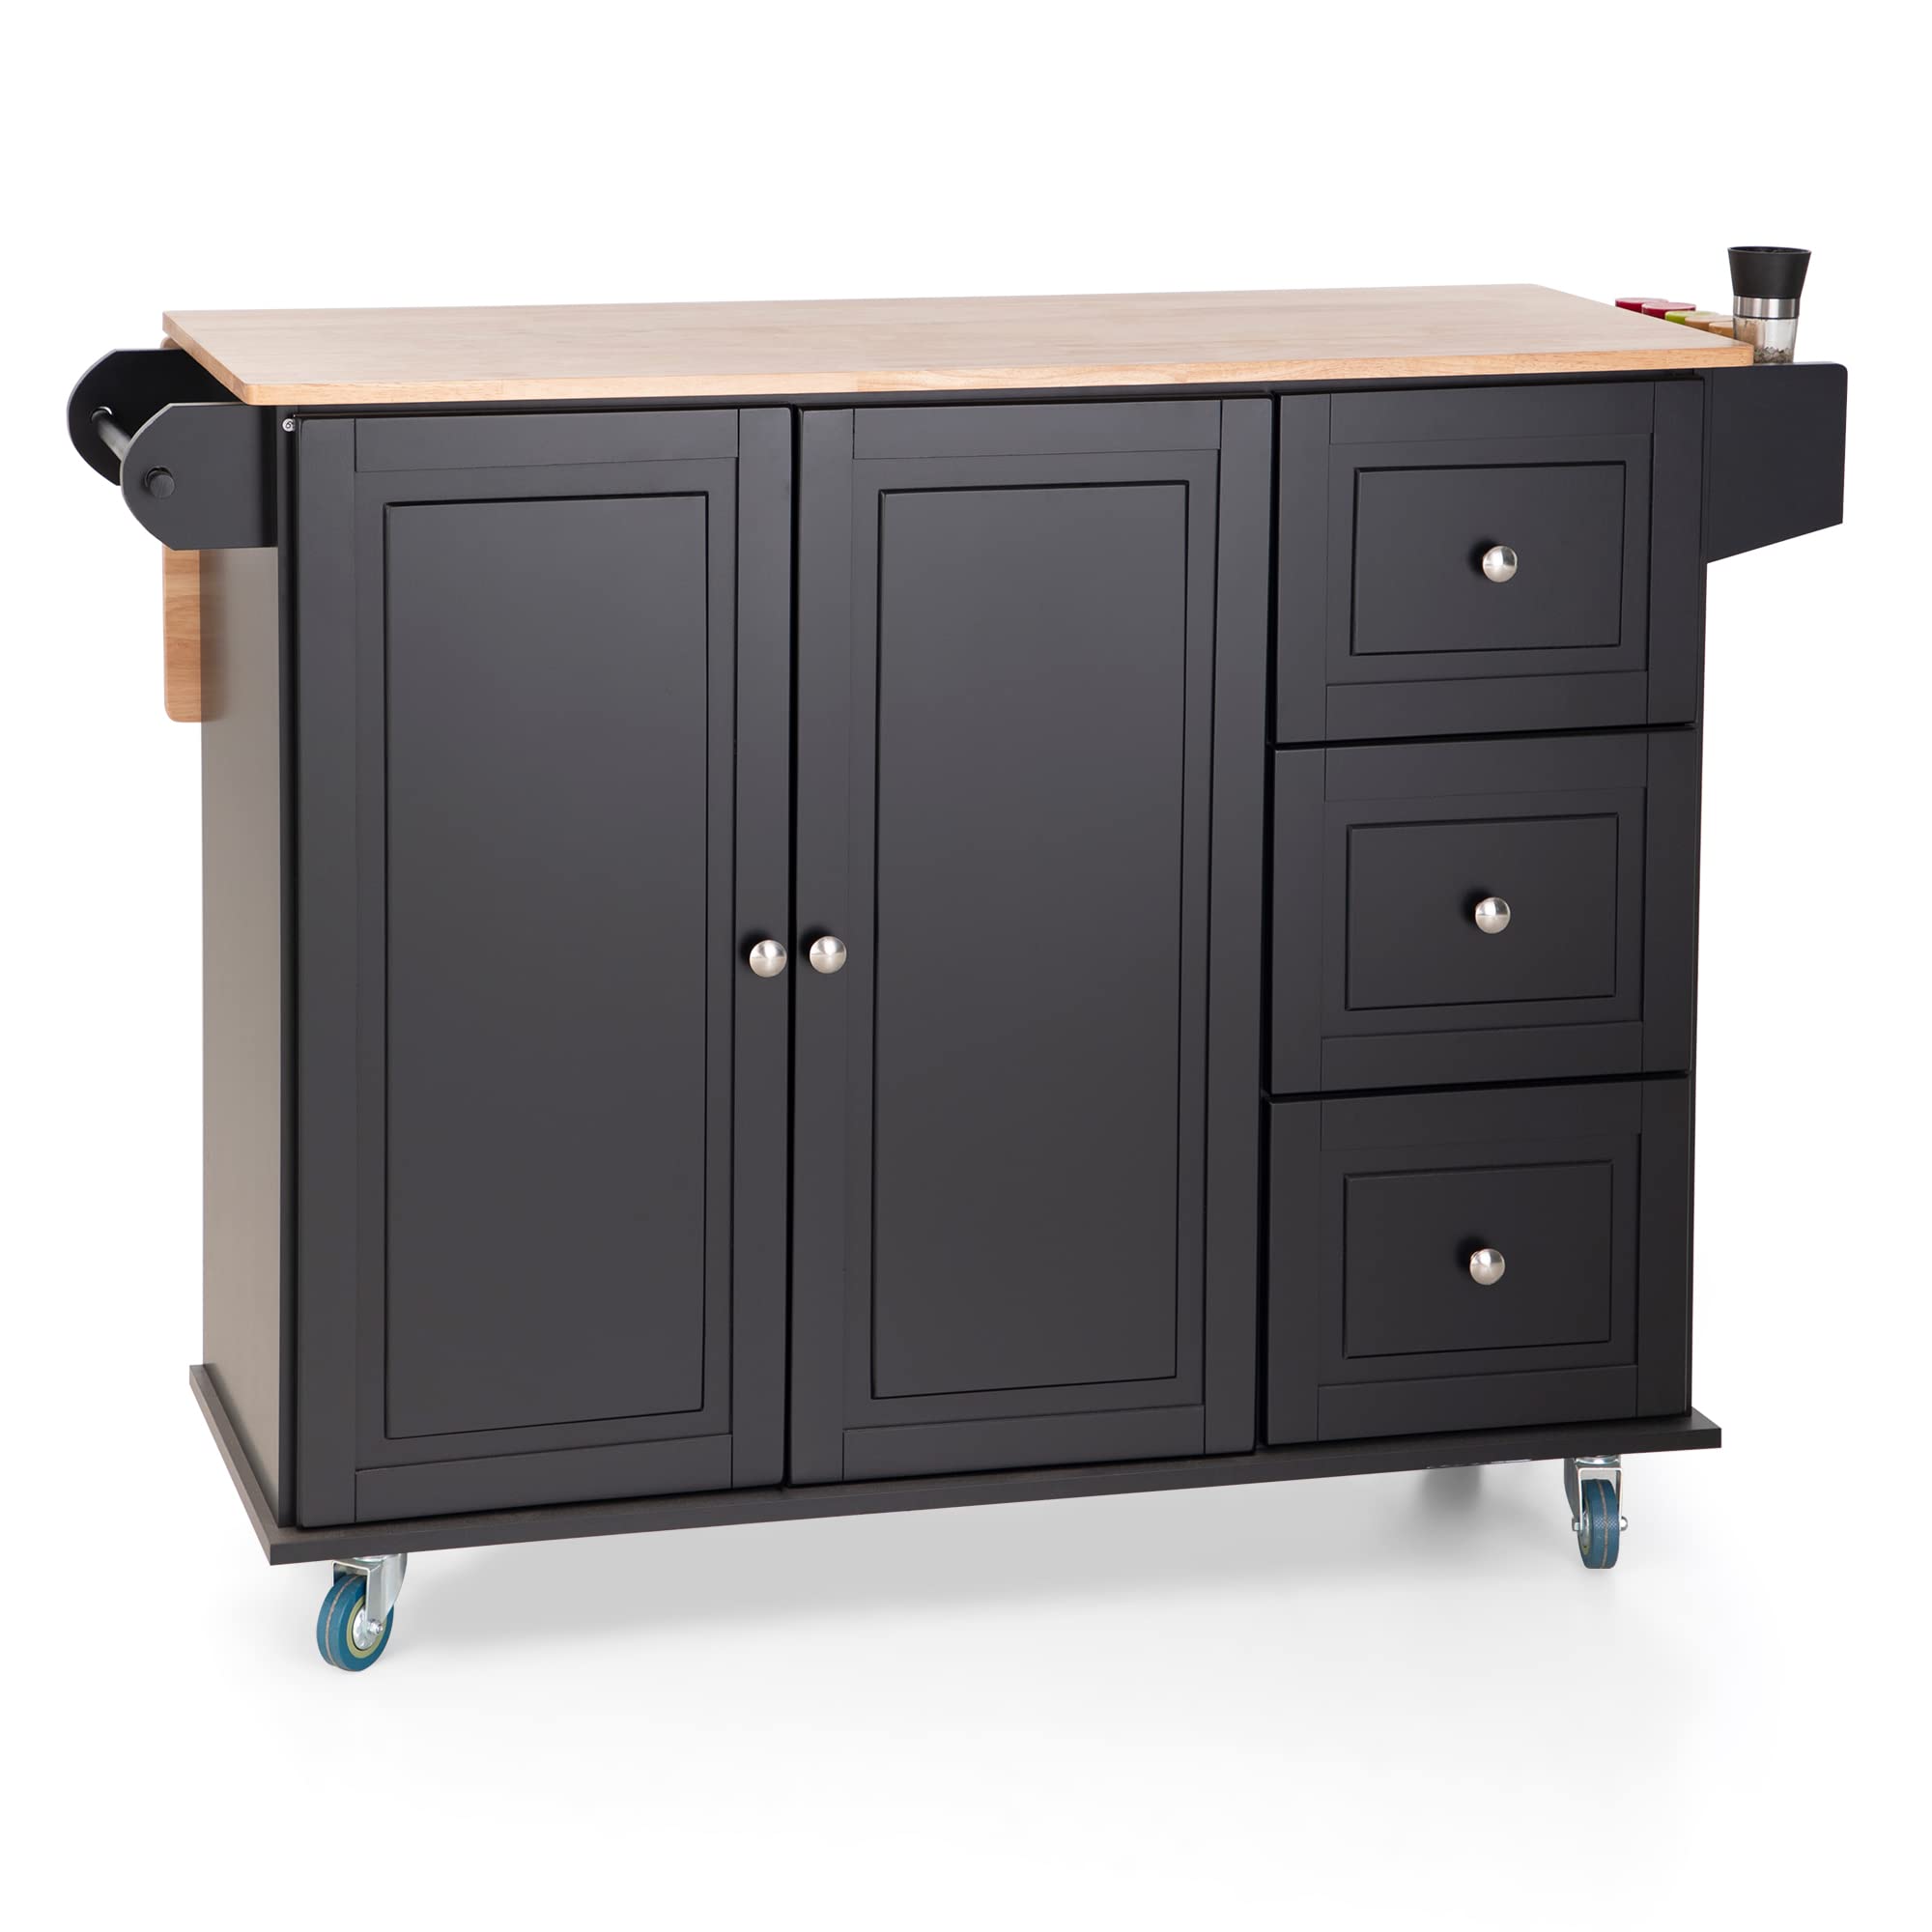 PHI VILLA Rolling Kitchen Island Cart with Drop-Leaf and Storage Features